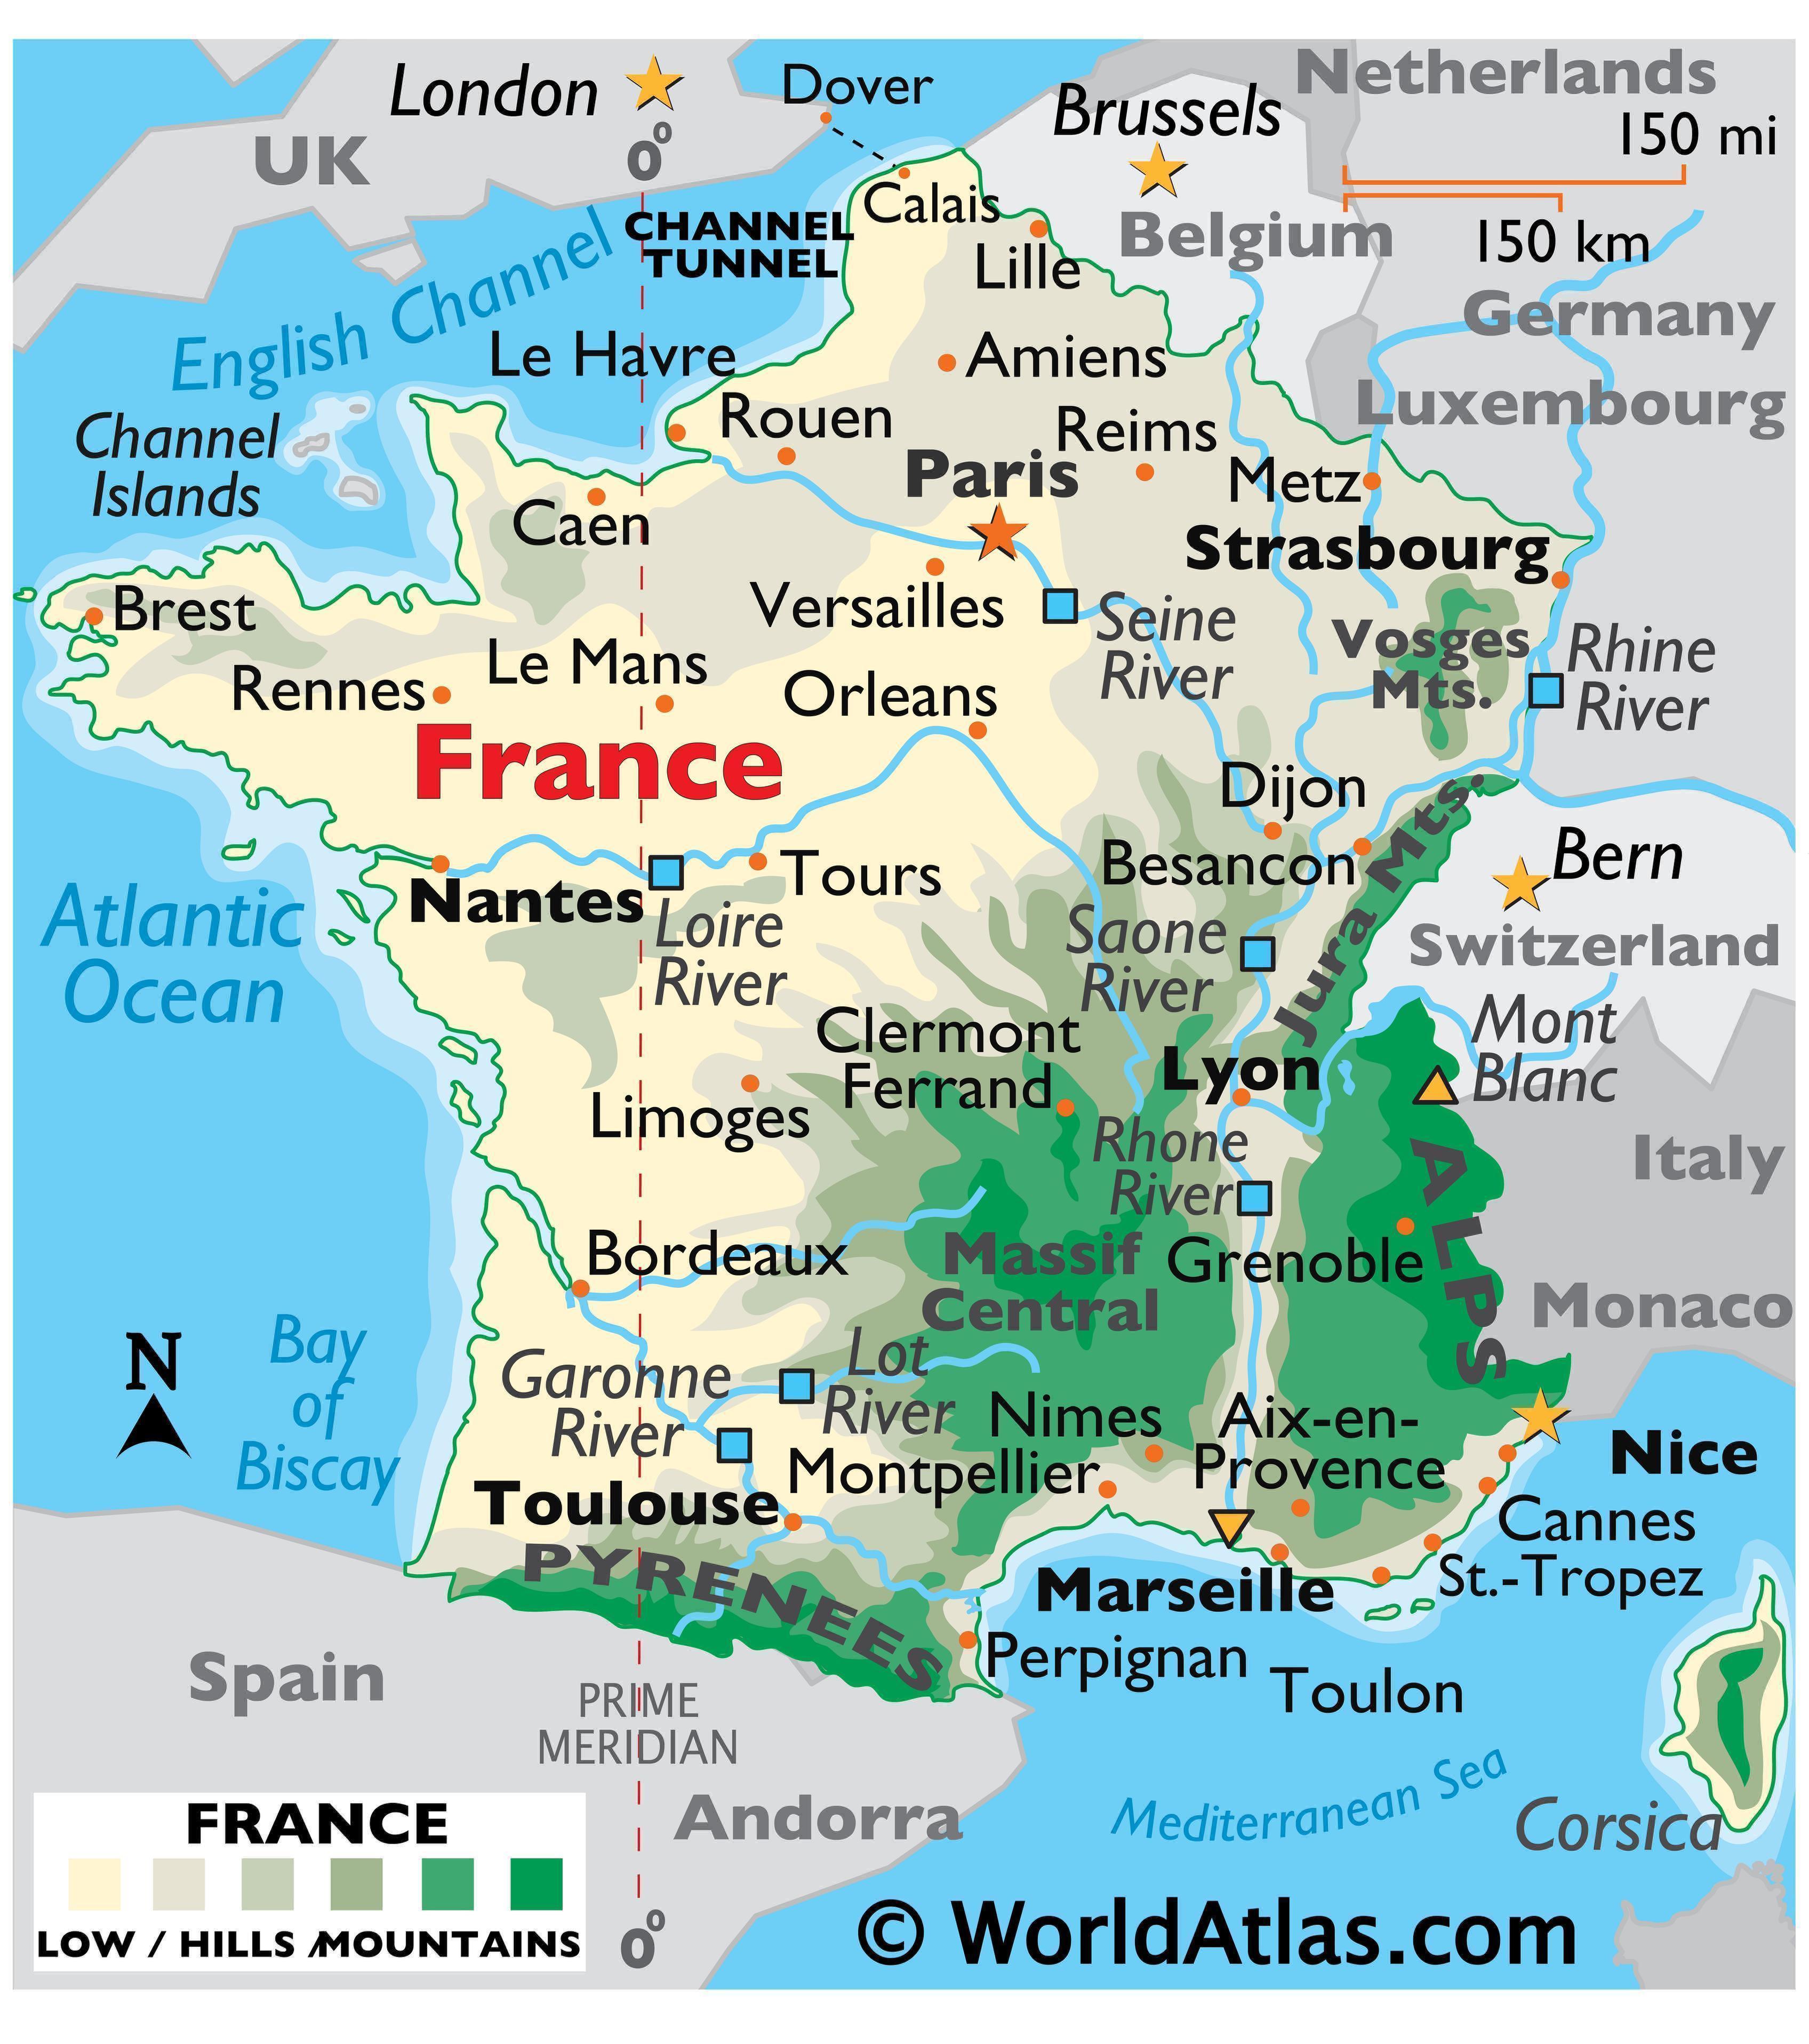 show me a map of france France Map Geography Of France Map Of France Worldatlas Com show me a map of france